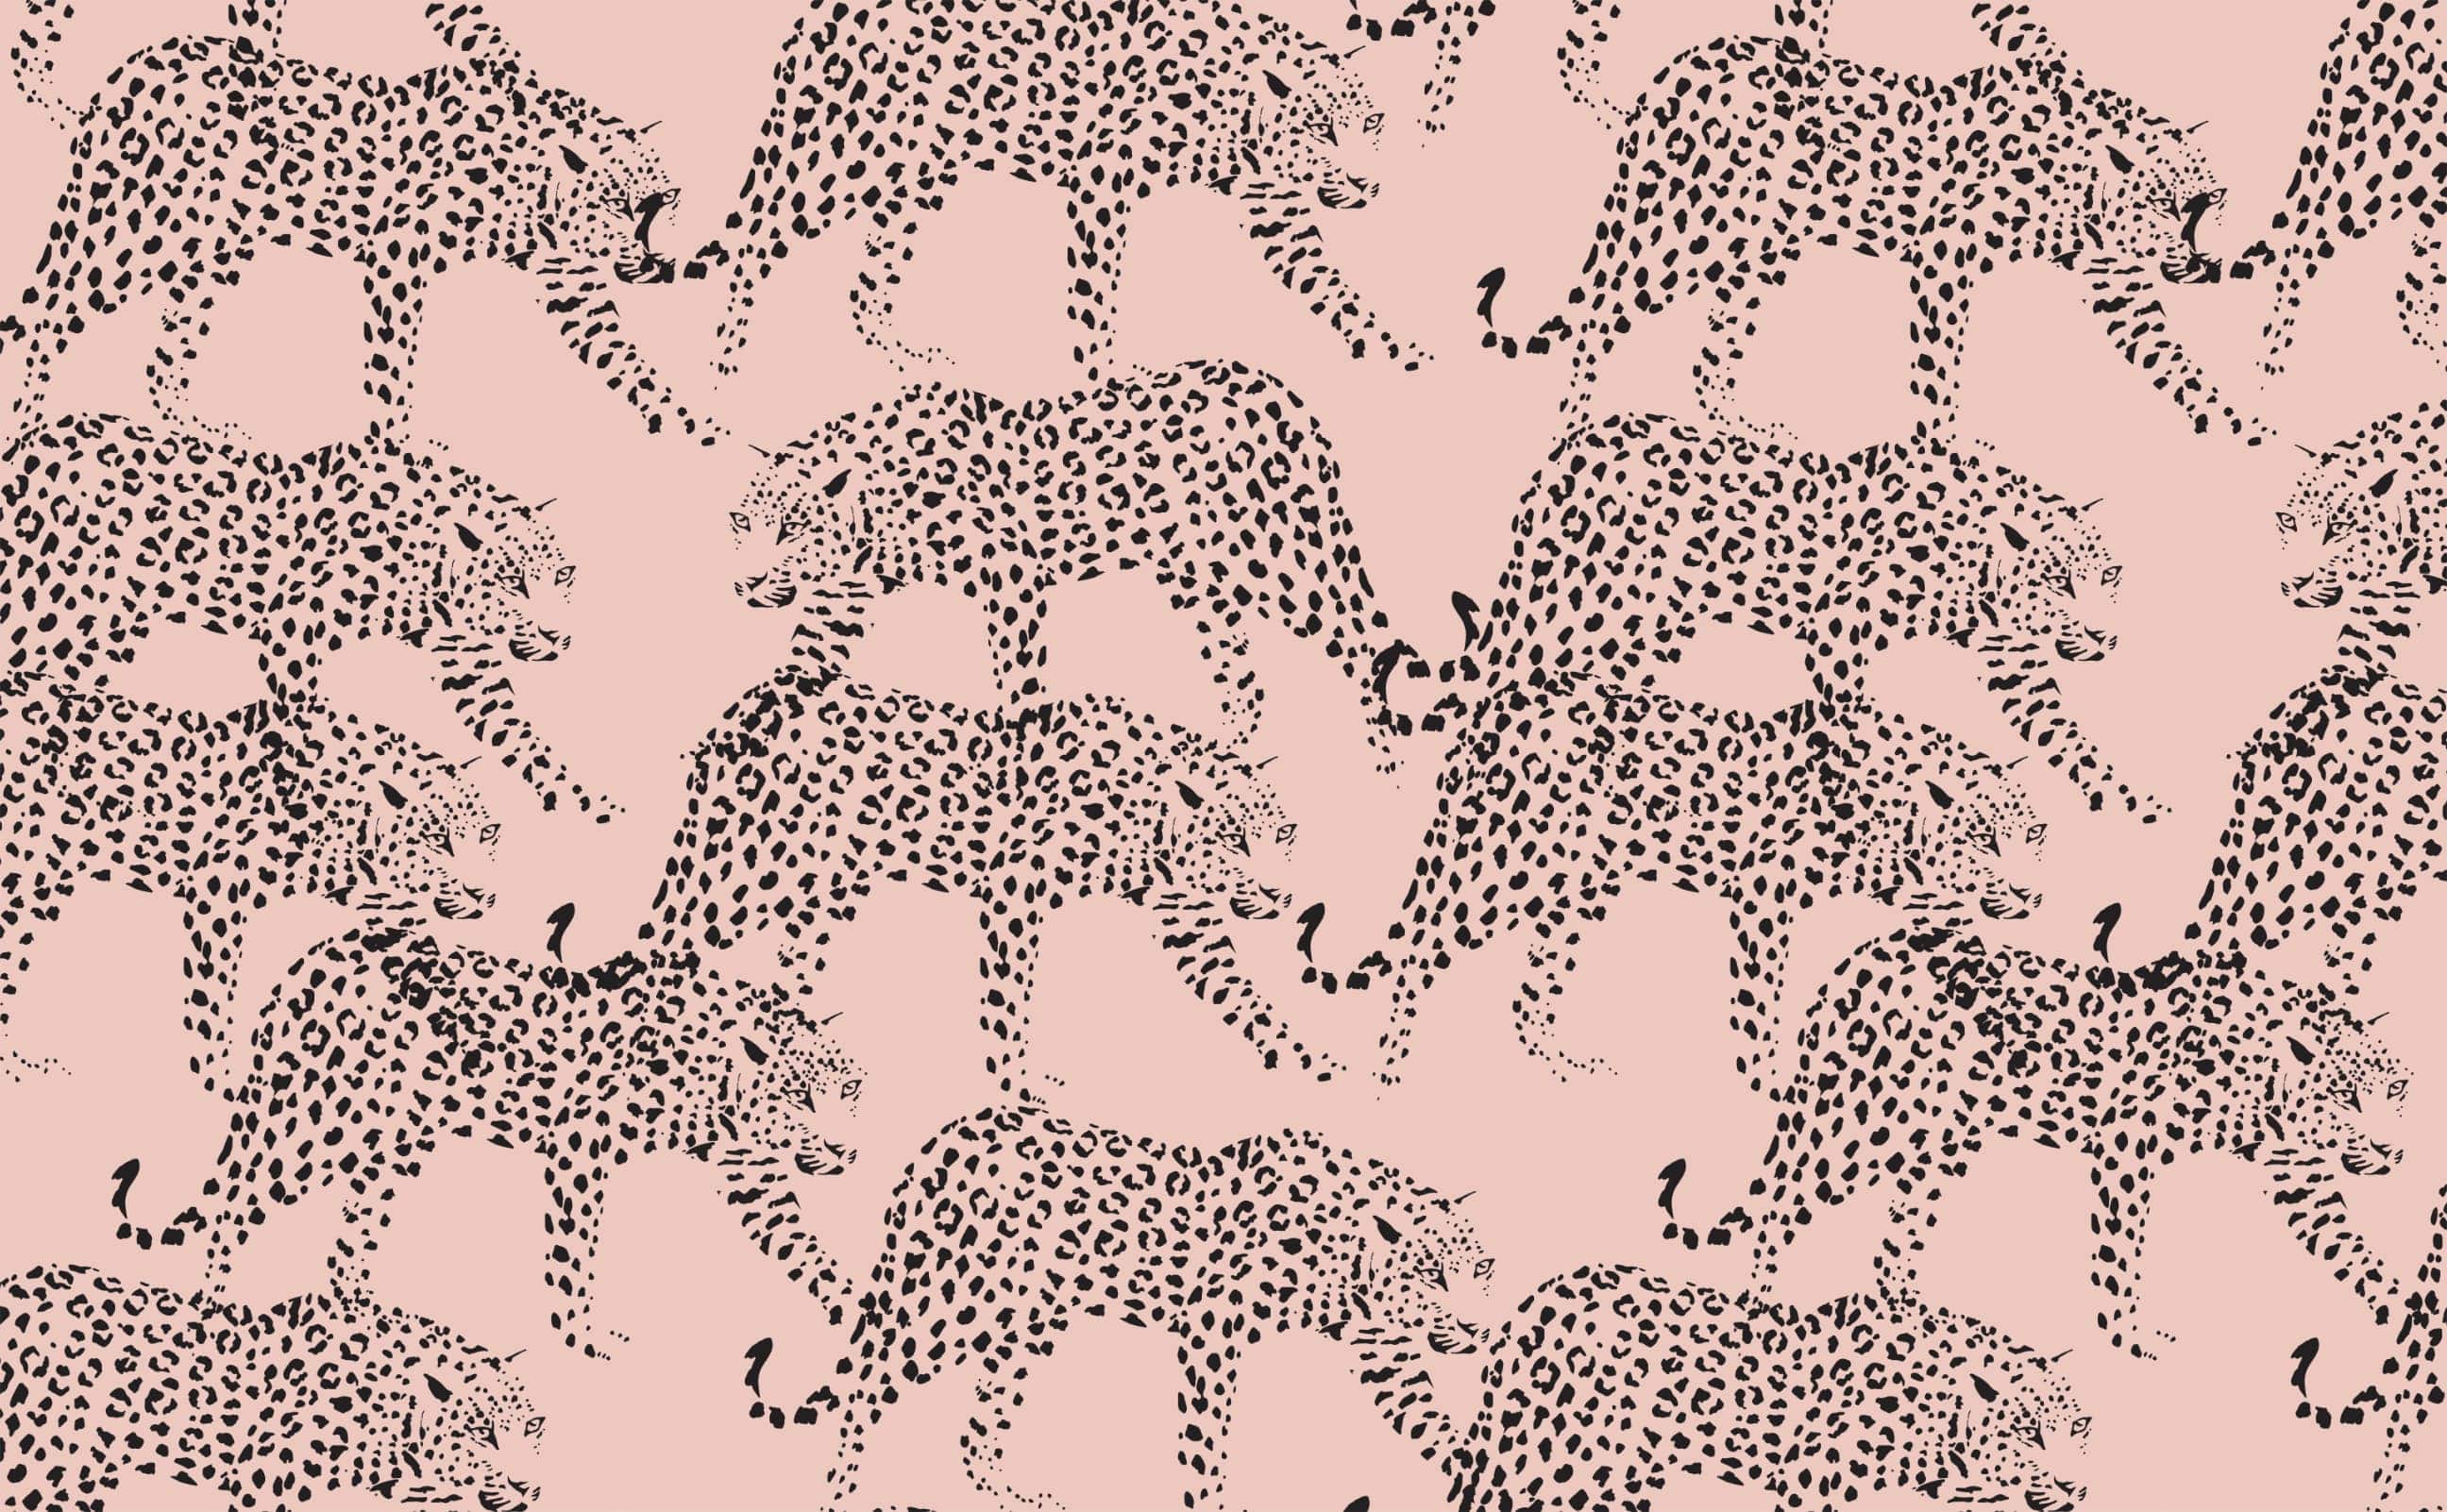 Dusty rose with black leopard illustrated overlay Pattern Wallpaper for Walls. Prowl and Purr. - Leopard